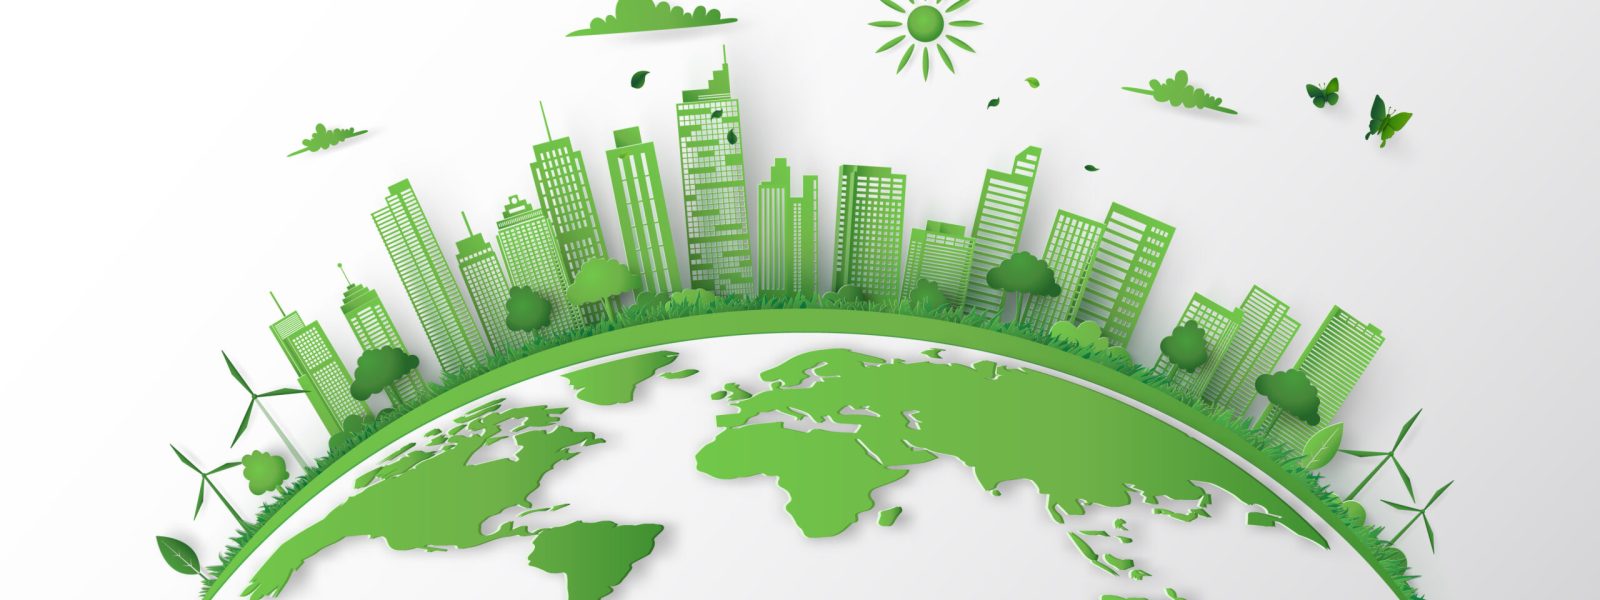 Concept of green city with building on earth. World environment day,Paper art 3d from digital crfat.